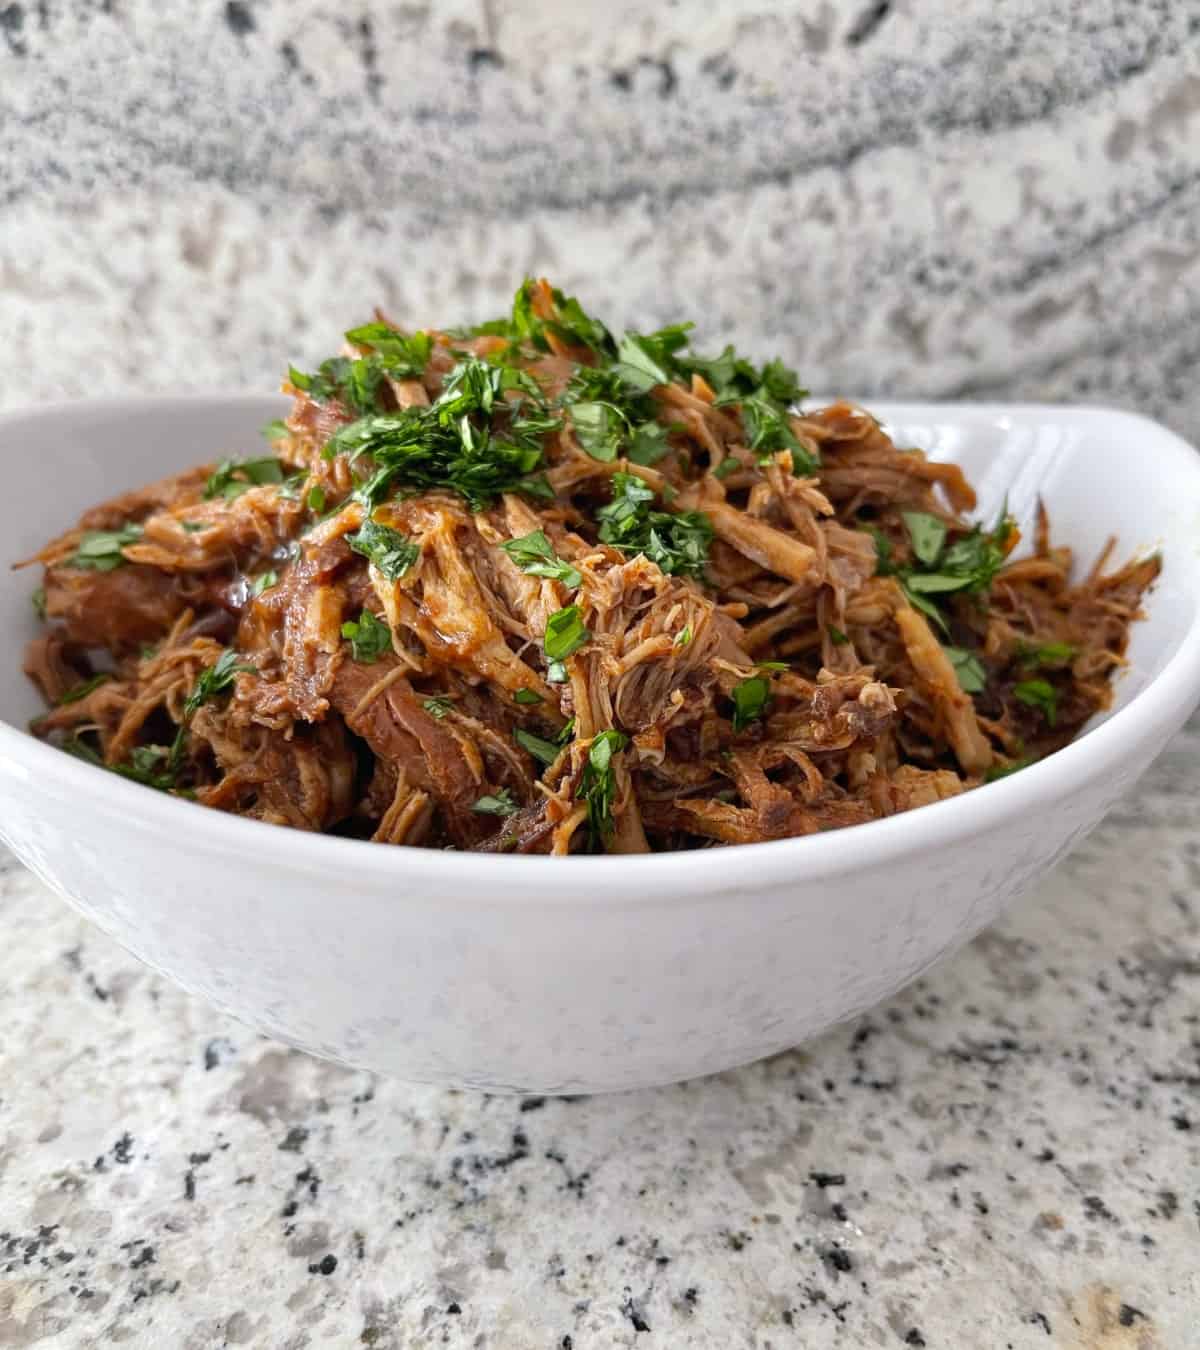 InstantPot Cherry Chipotle Shredded Pork topped with chopped cilantro in white serving bowl on granite.